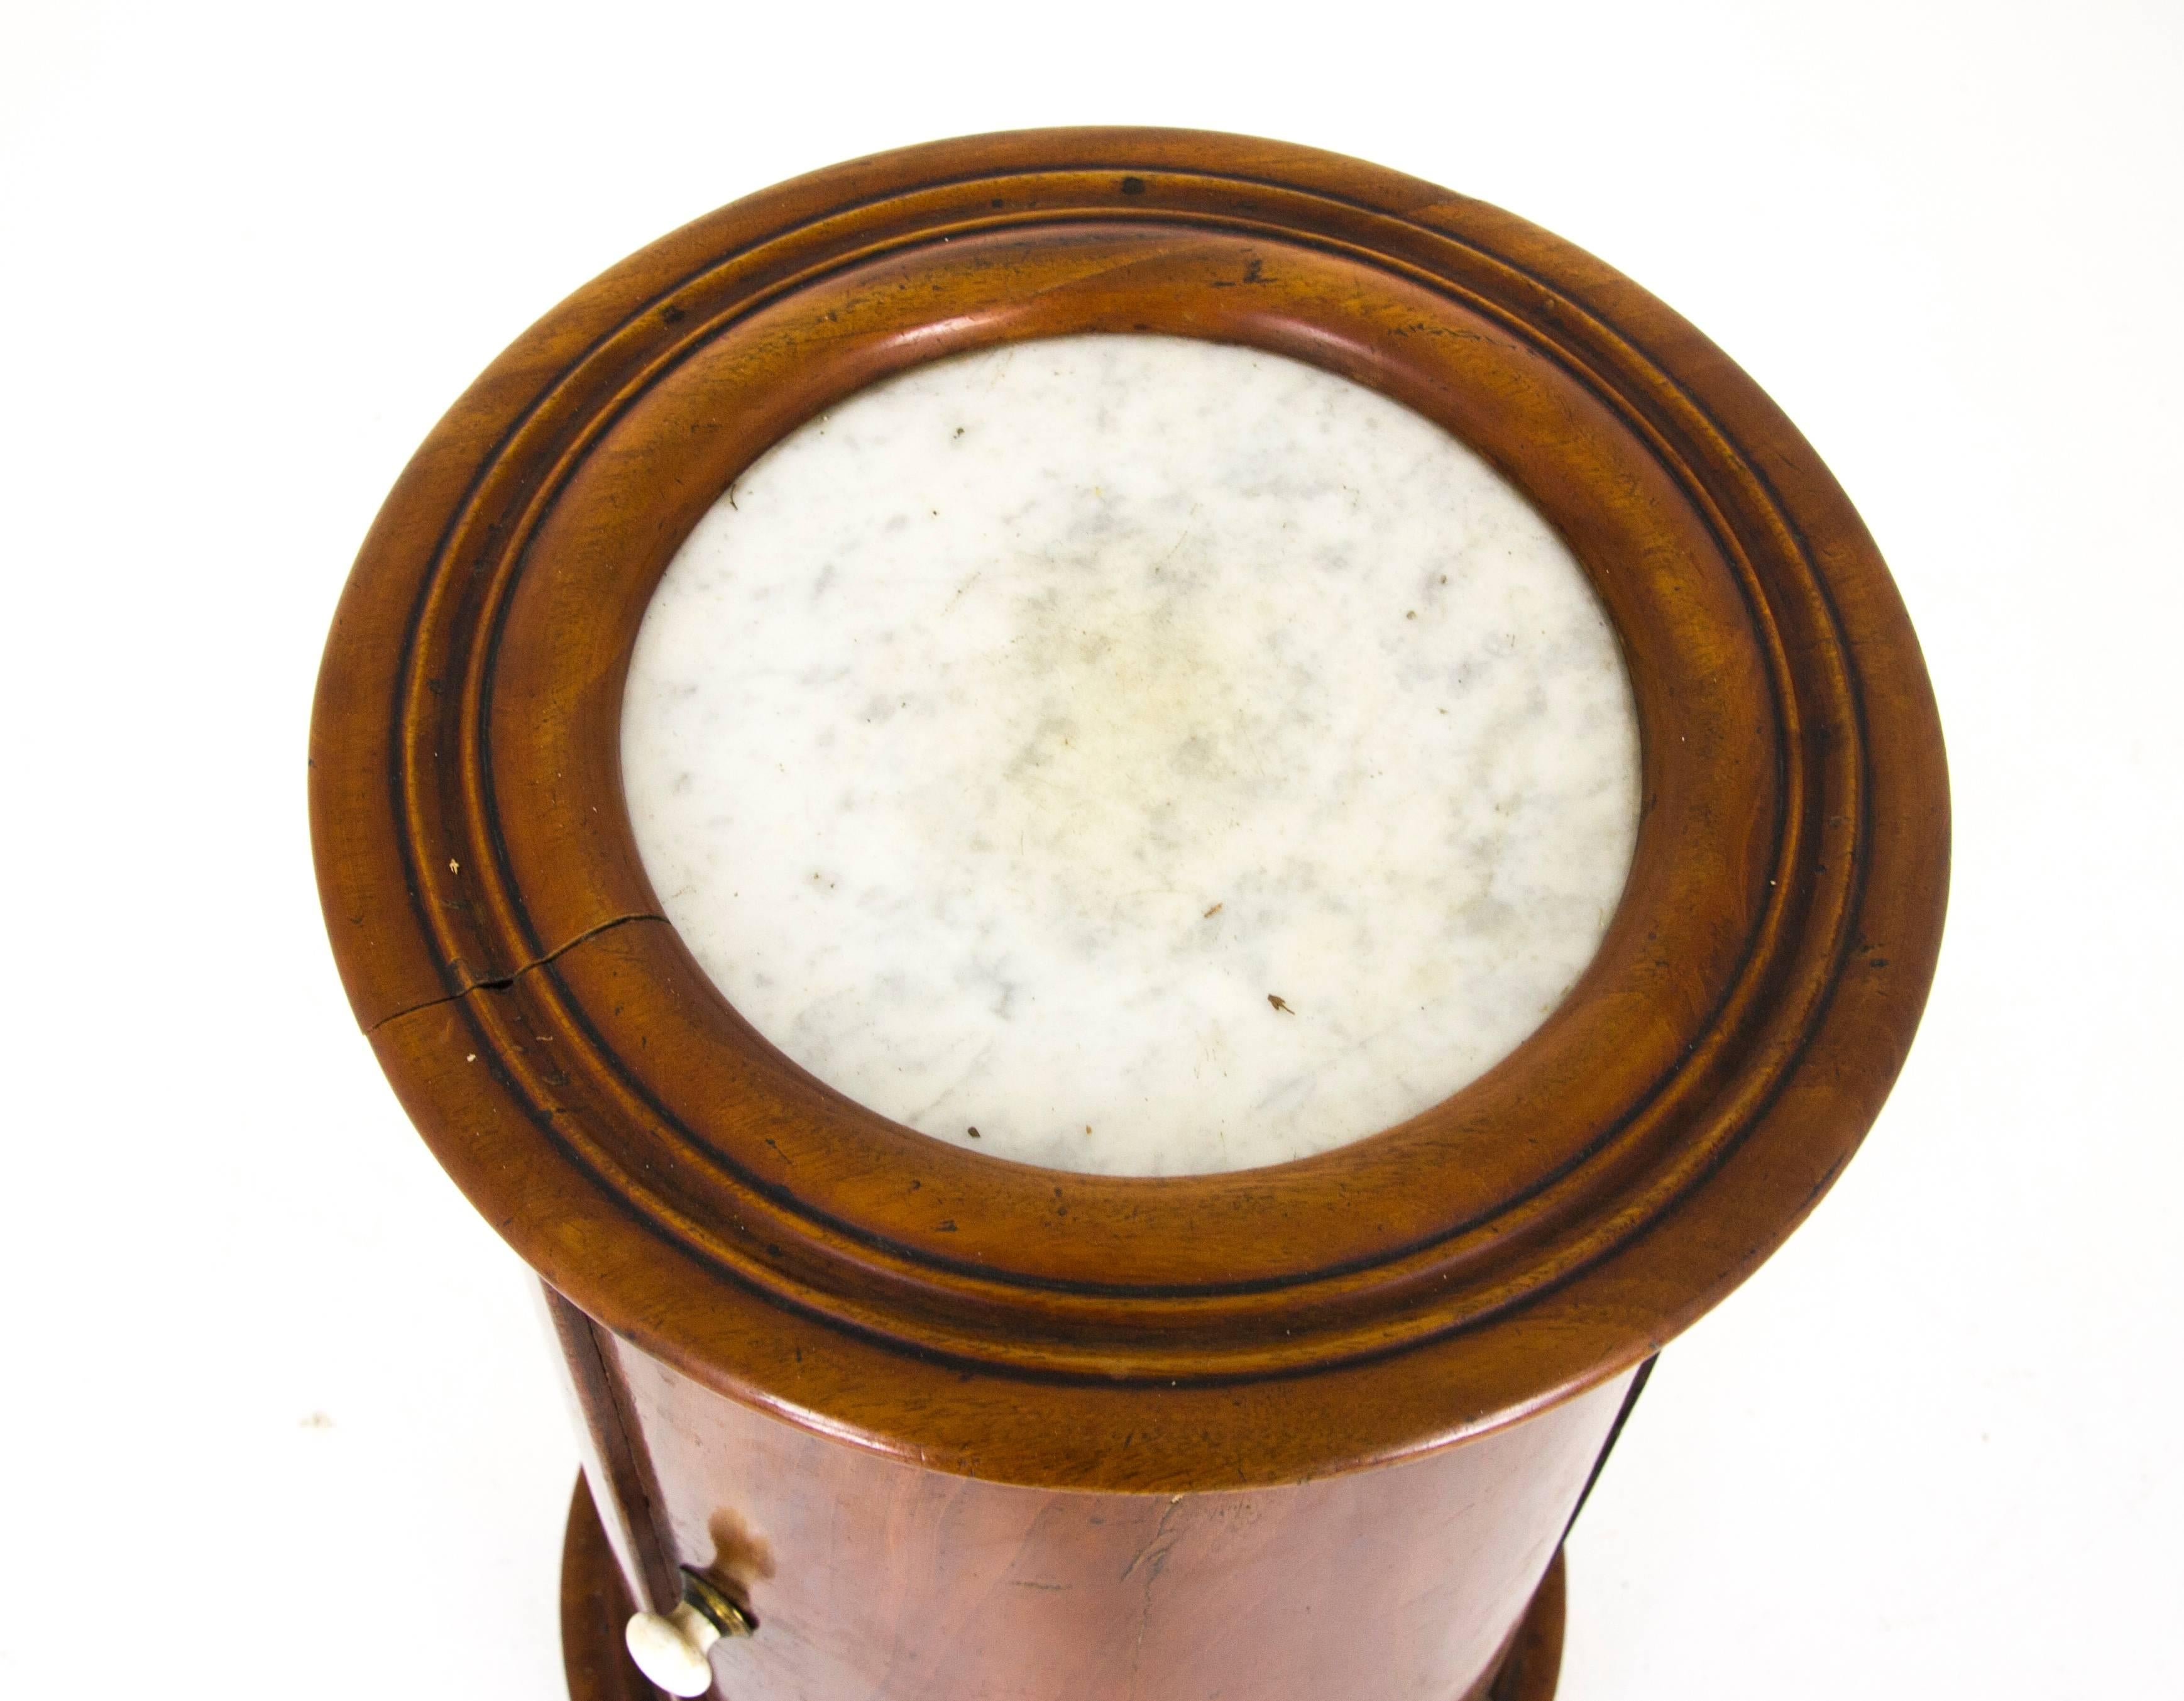 Antique nightstand, bedside table, cylindrical lamp table, Scotland 1880, b928

Scotland, 1880
Solid walnut
Original finish
Circular marble top
Single door with two fitted shelves
Ending on a circular plinth base

$750

B928
14.5